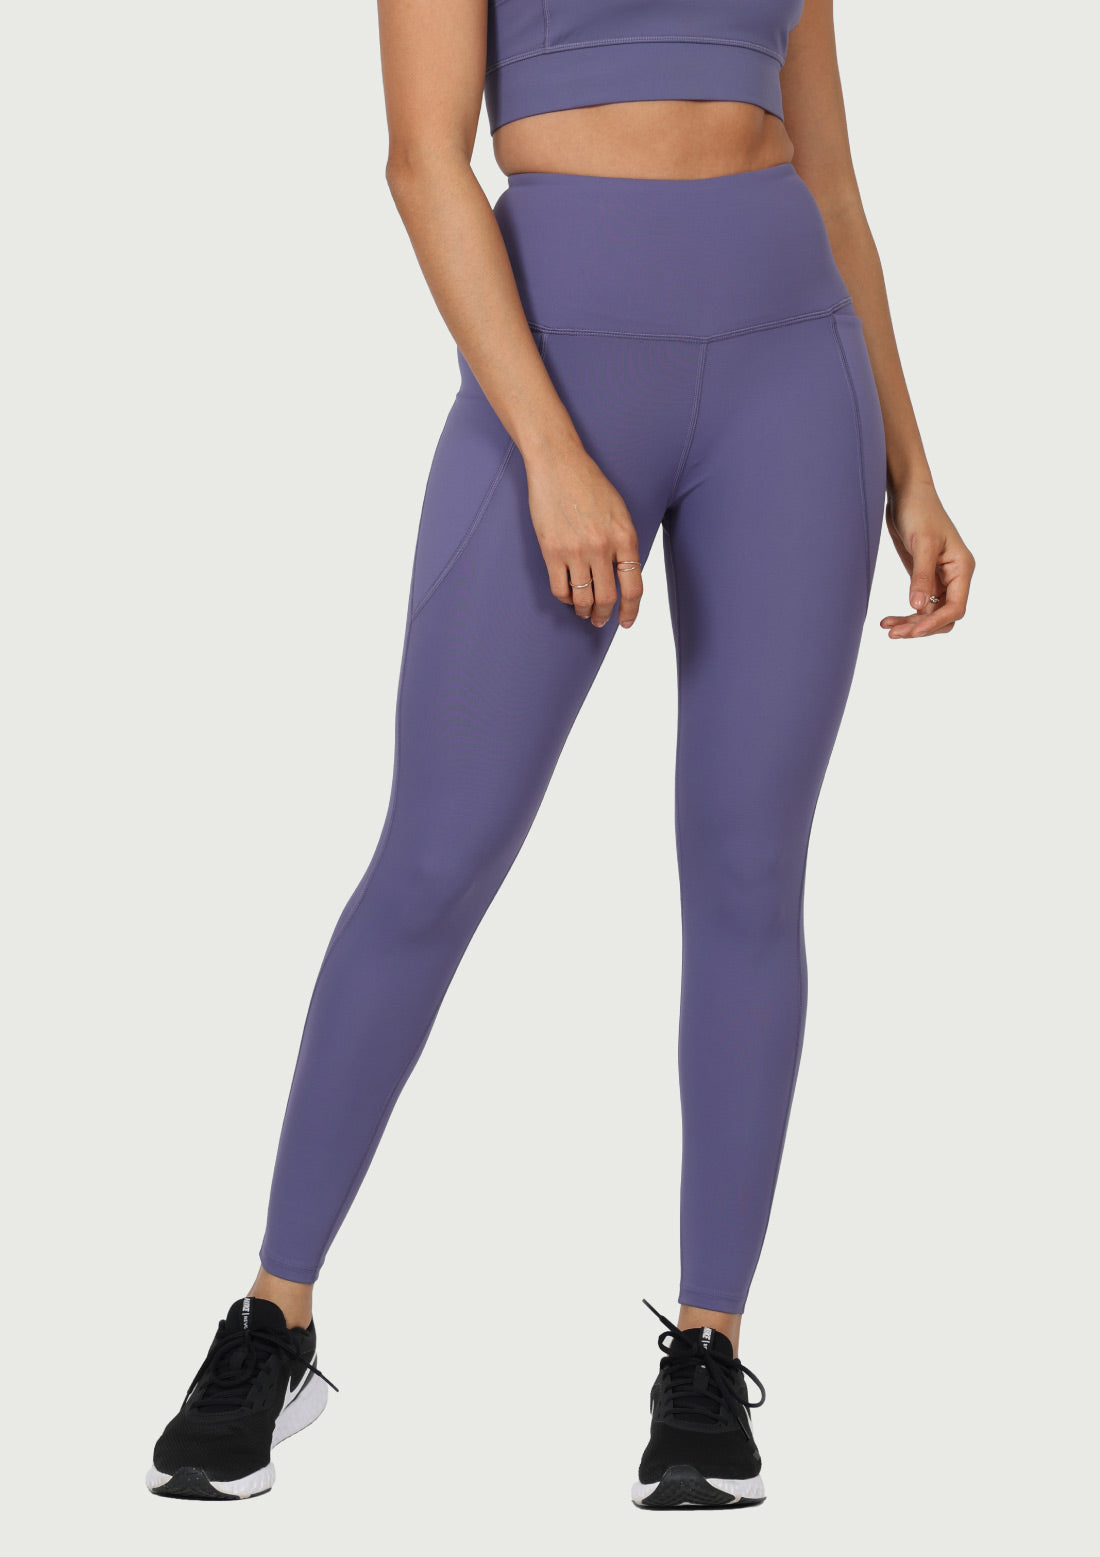 Bright Workout Clothes Will Give You Fitness Motivation